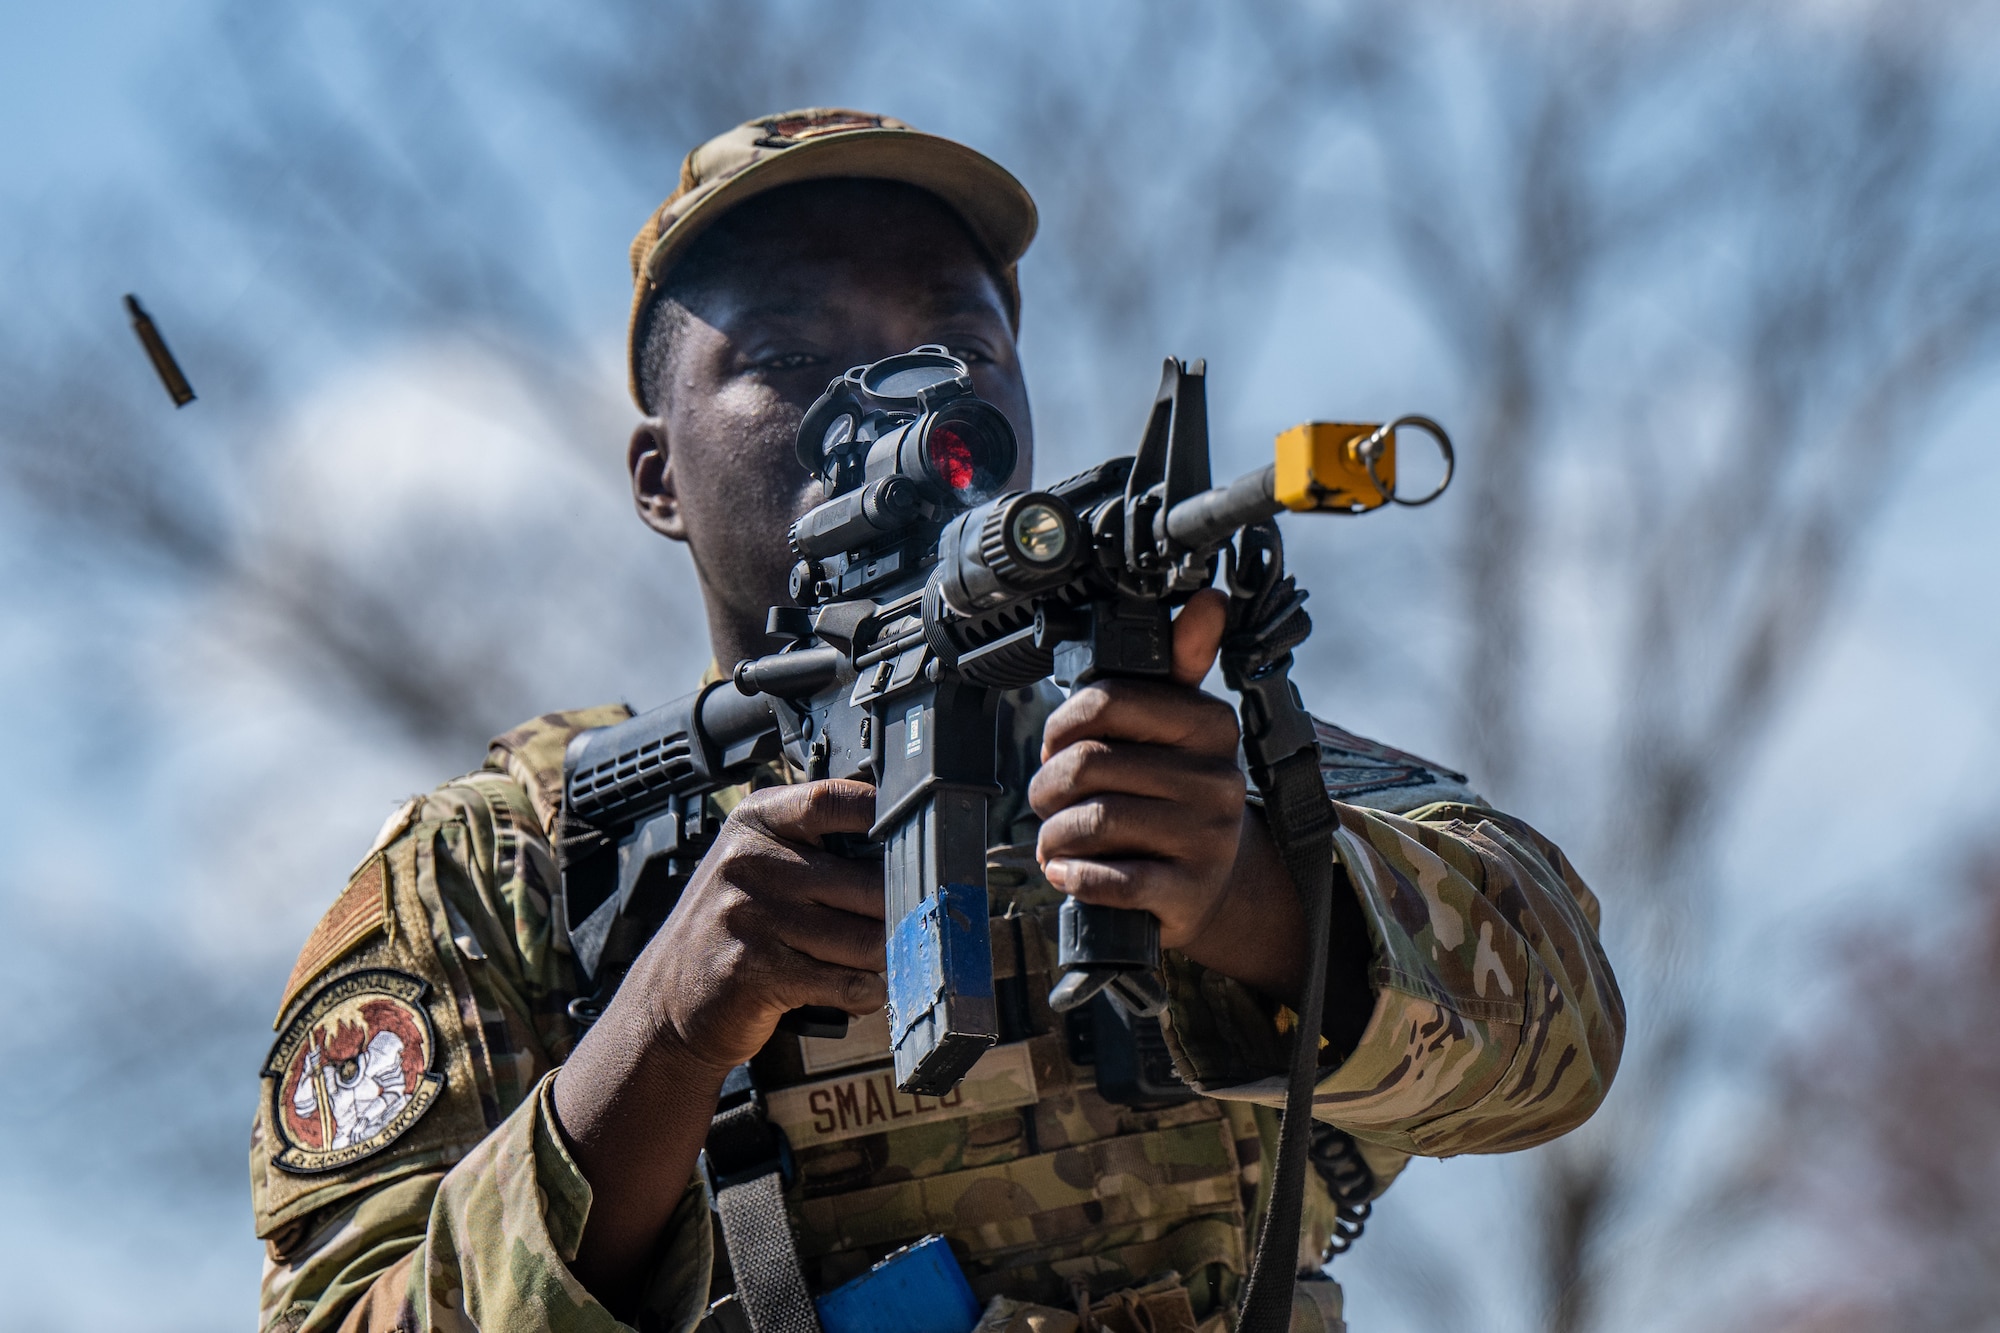 An Airman fires their weapon with blank rounds.